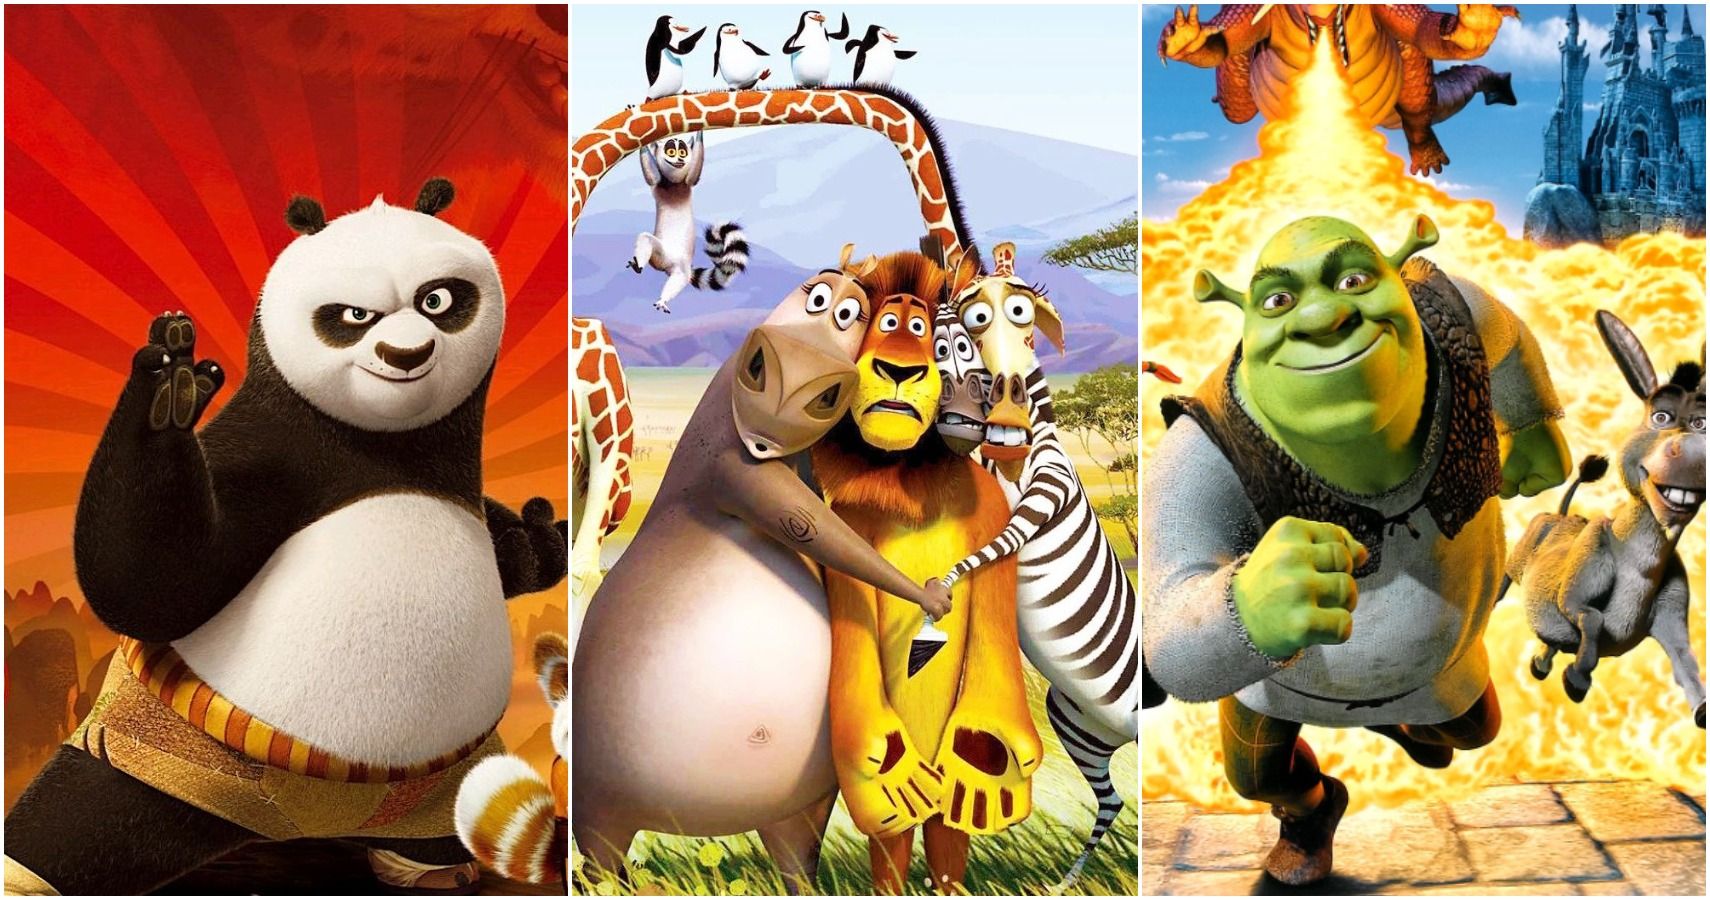 The 10 Best DreamWorks Animated Movies From The 2000s (According To  Metacritic)